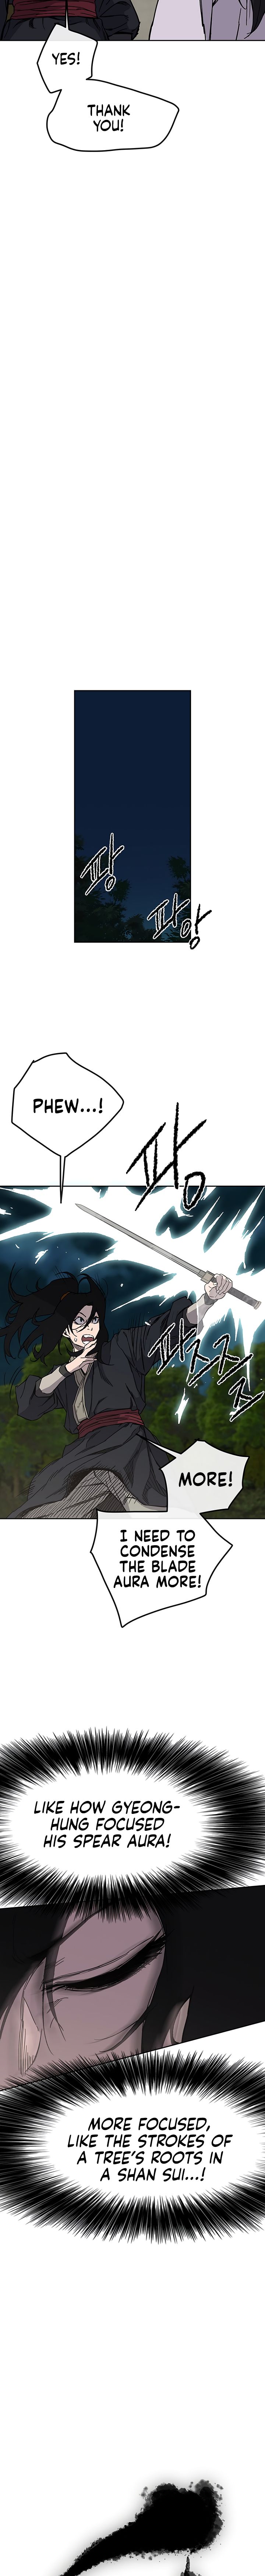 The Undefeatable Swordsman - Chapter 22 Page 2